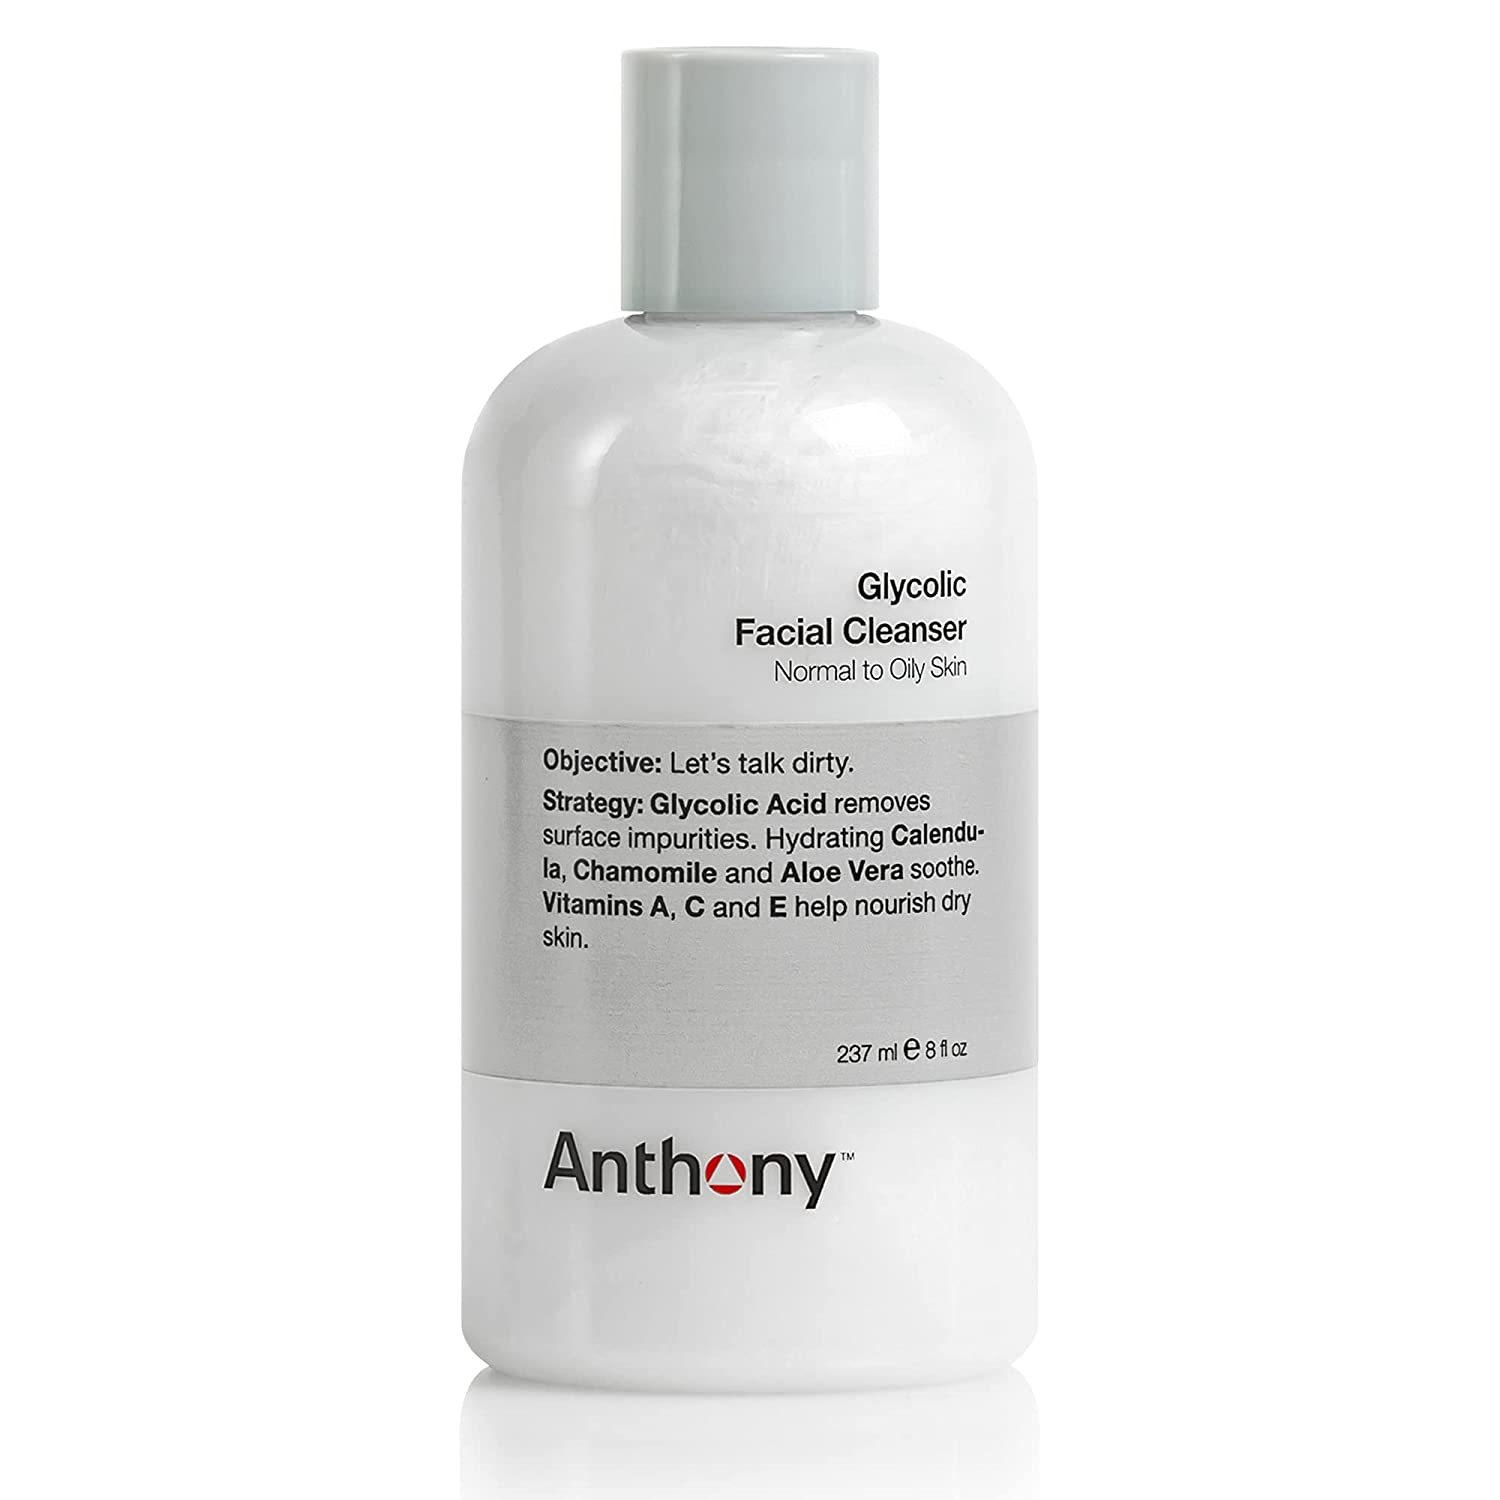 Anthony Glycolic Facial Cleanser, Face Wash for Men, 8 Oz